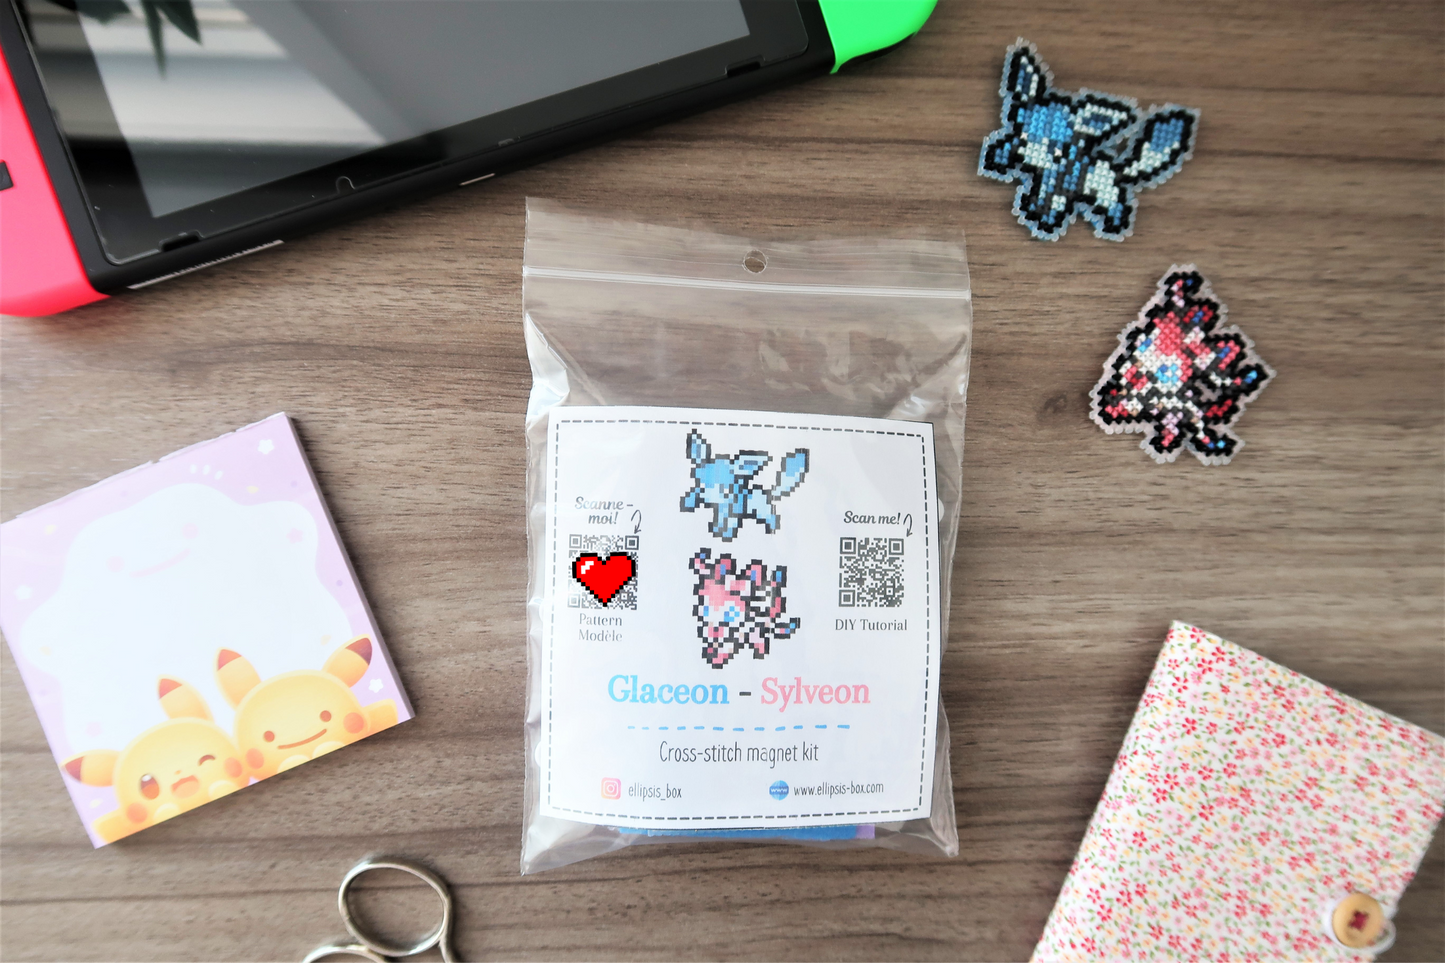 Glaceon and Sylveon from Pokemon - Cross stitch magnet kit